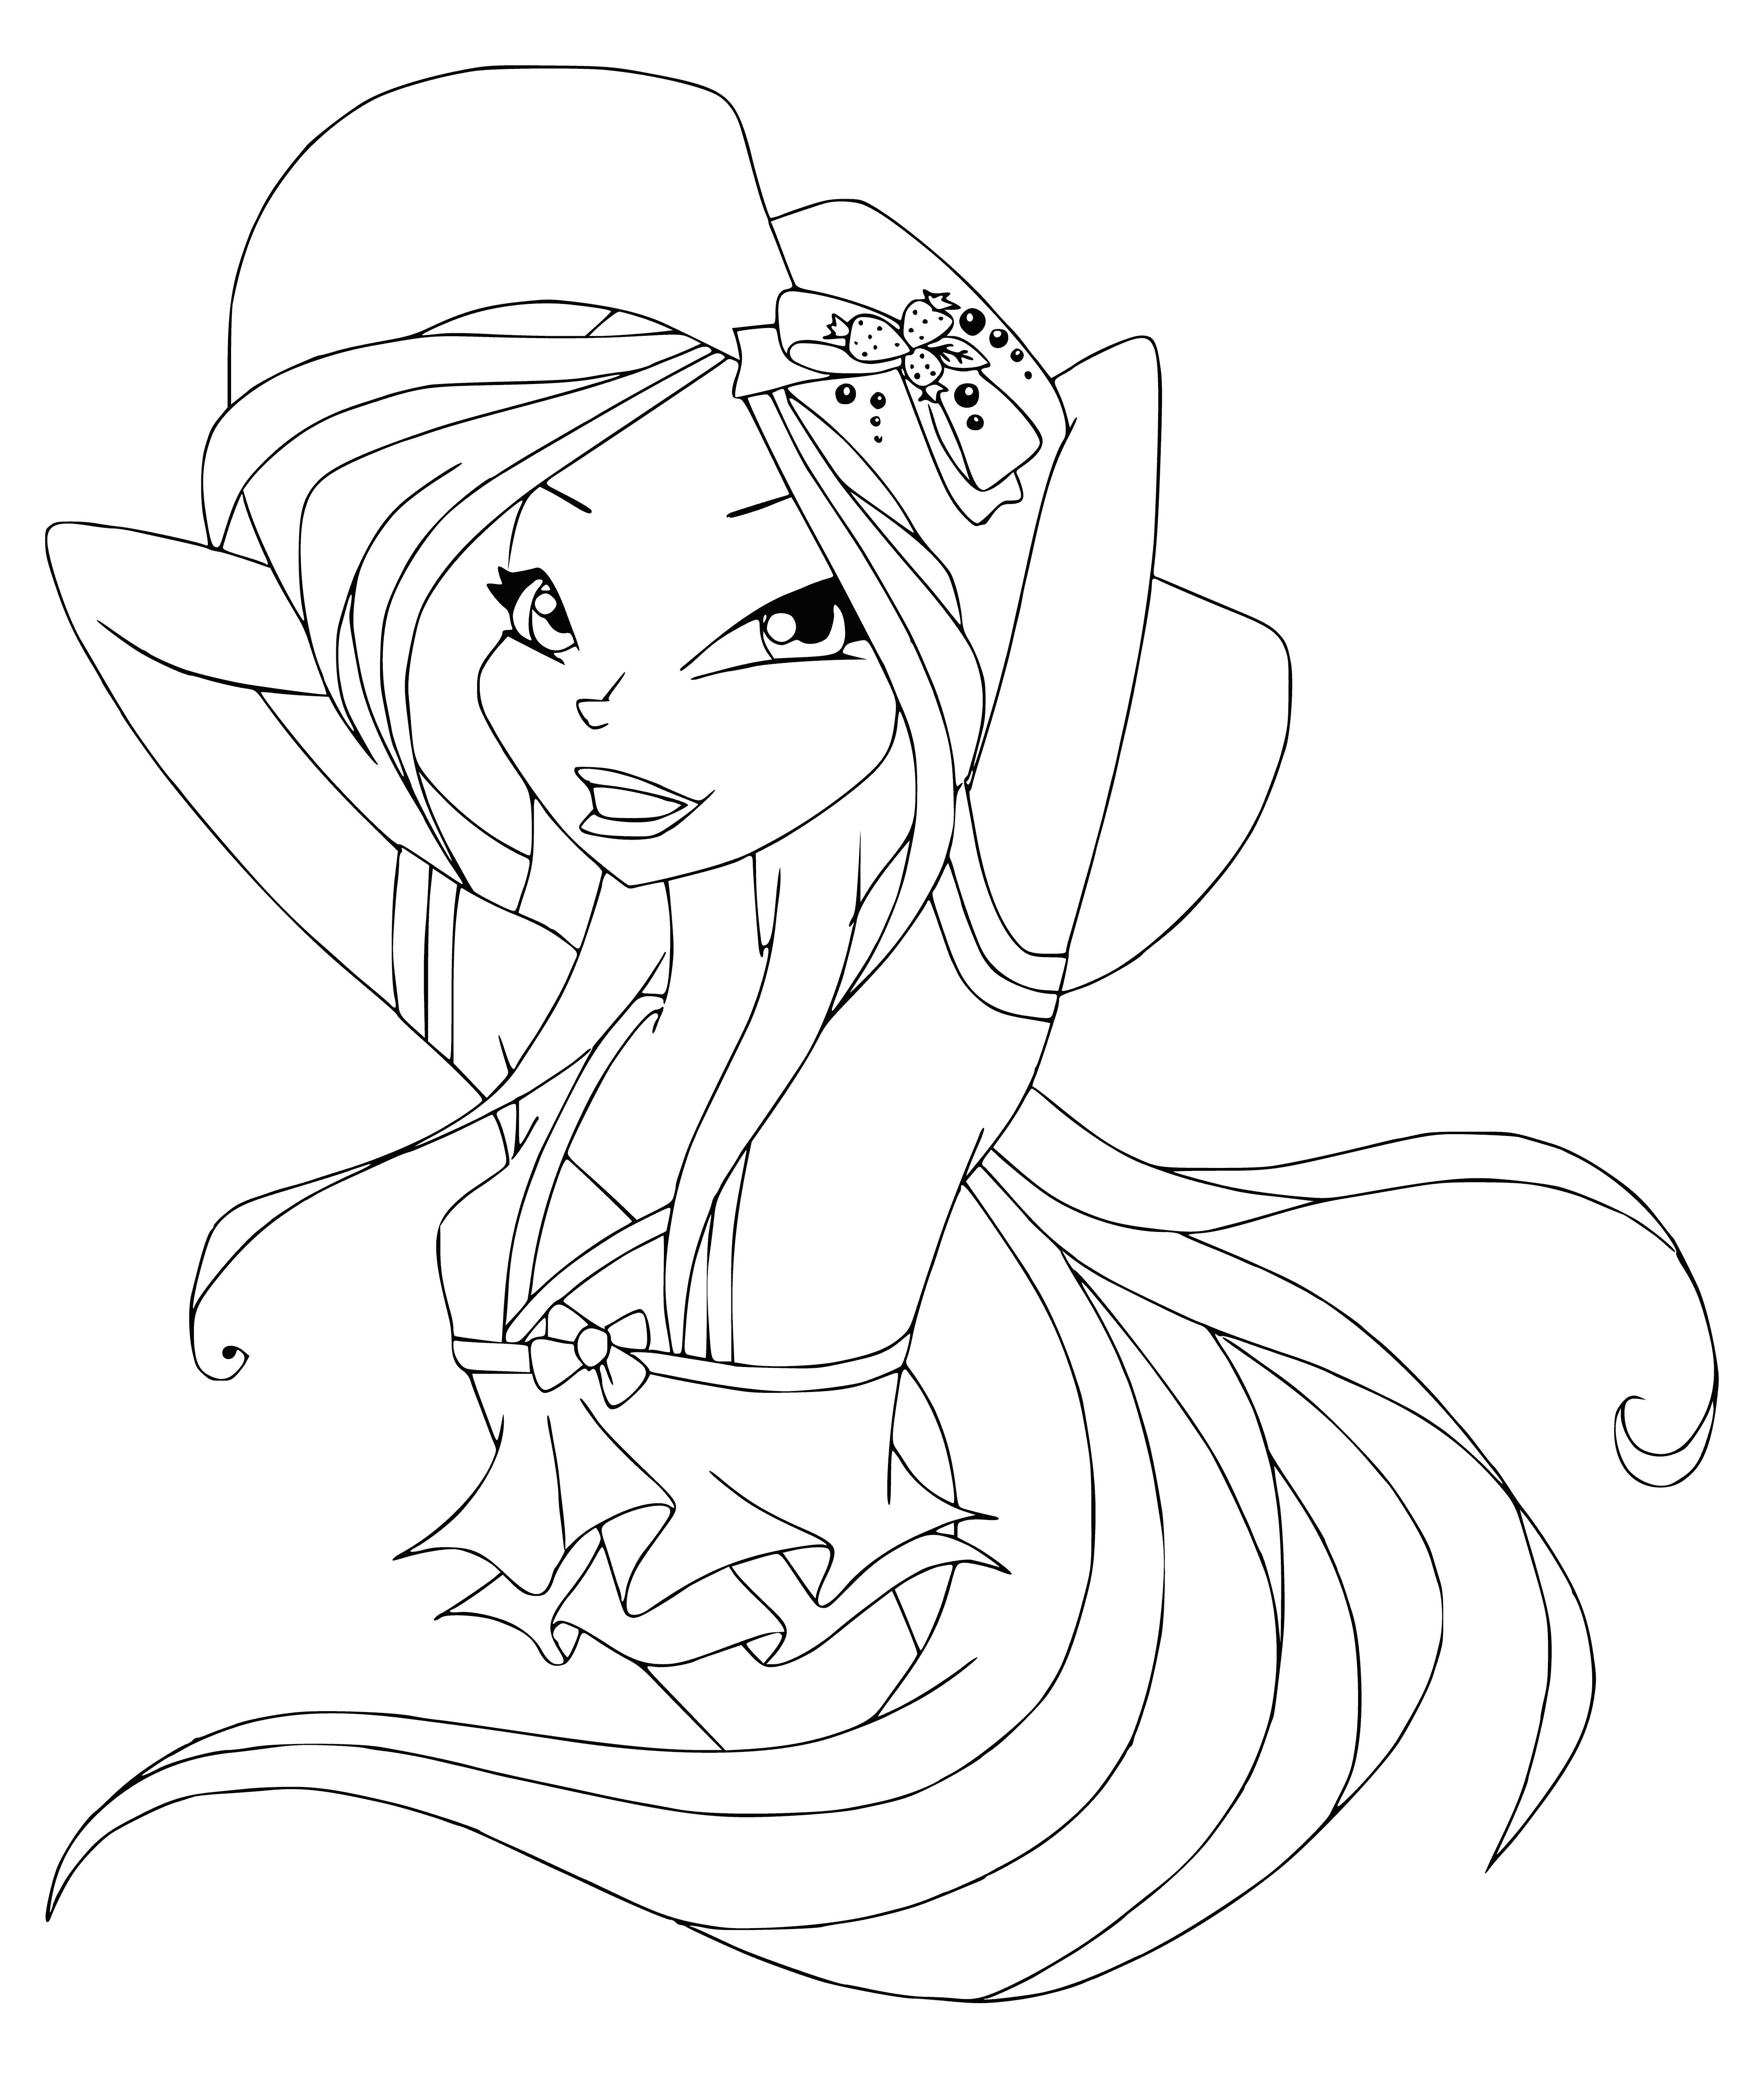 coloring page: Woman in white dress wearing floral hat reads book; coloring page to be enjoyed by all.